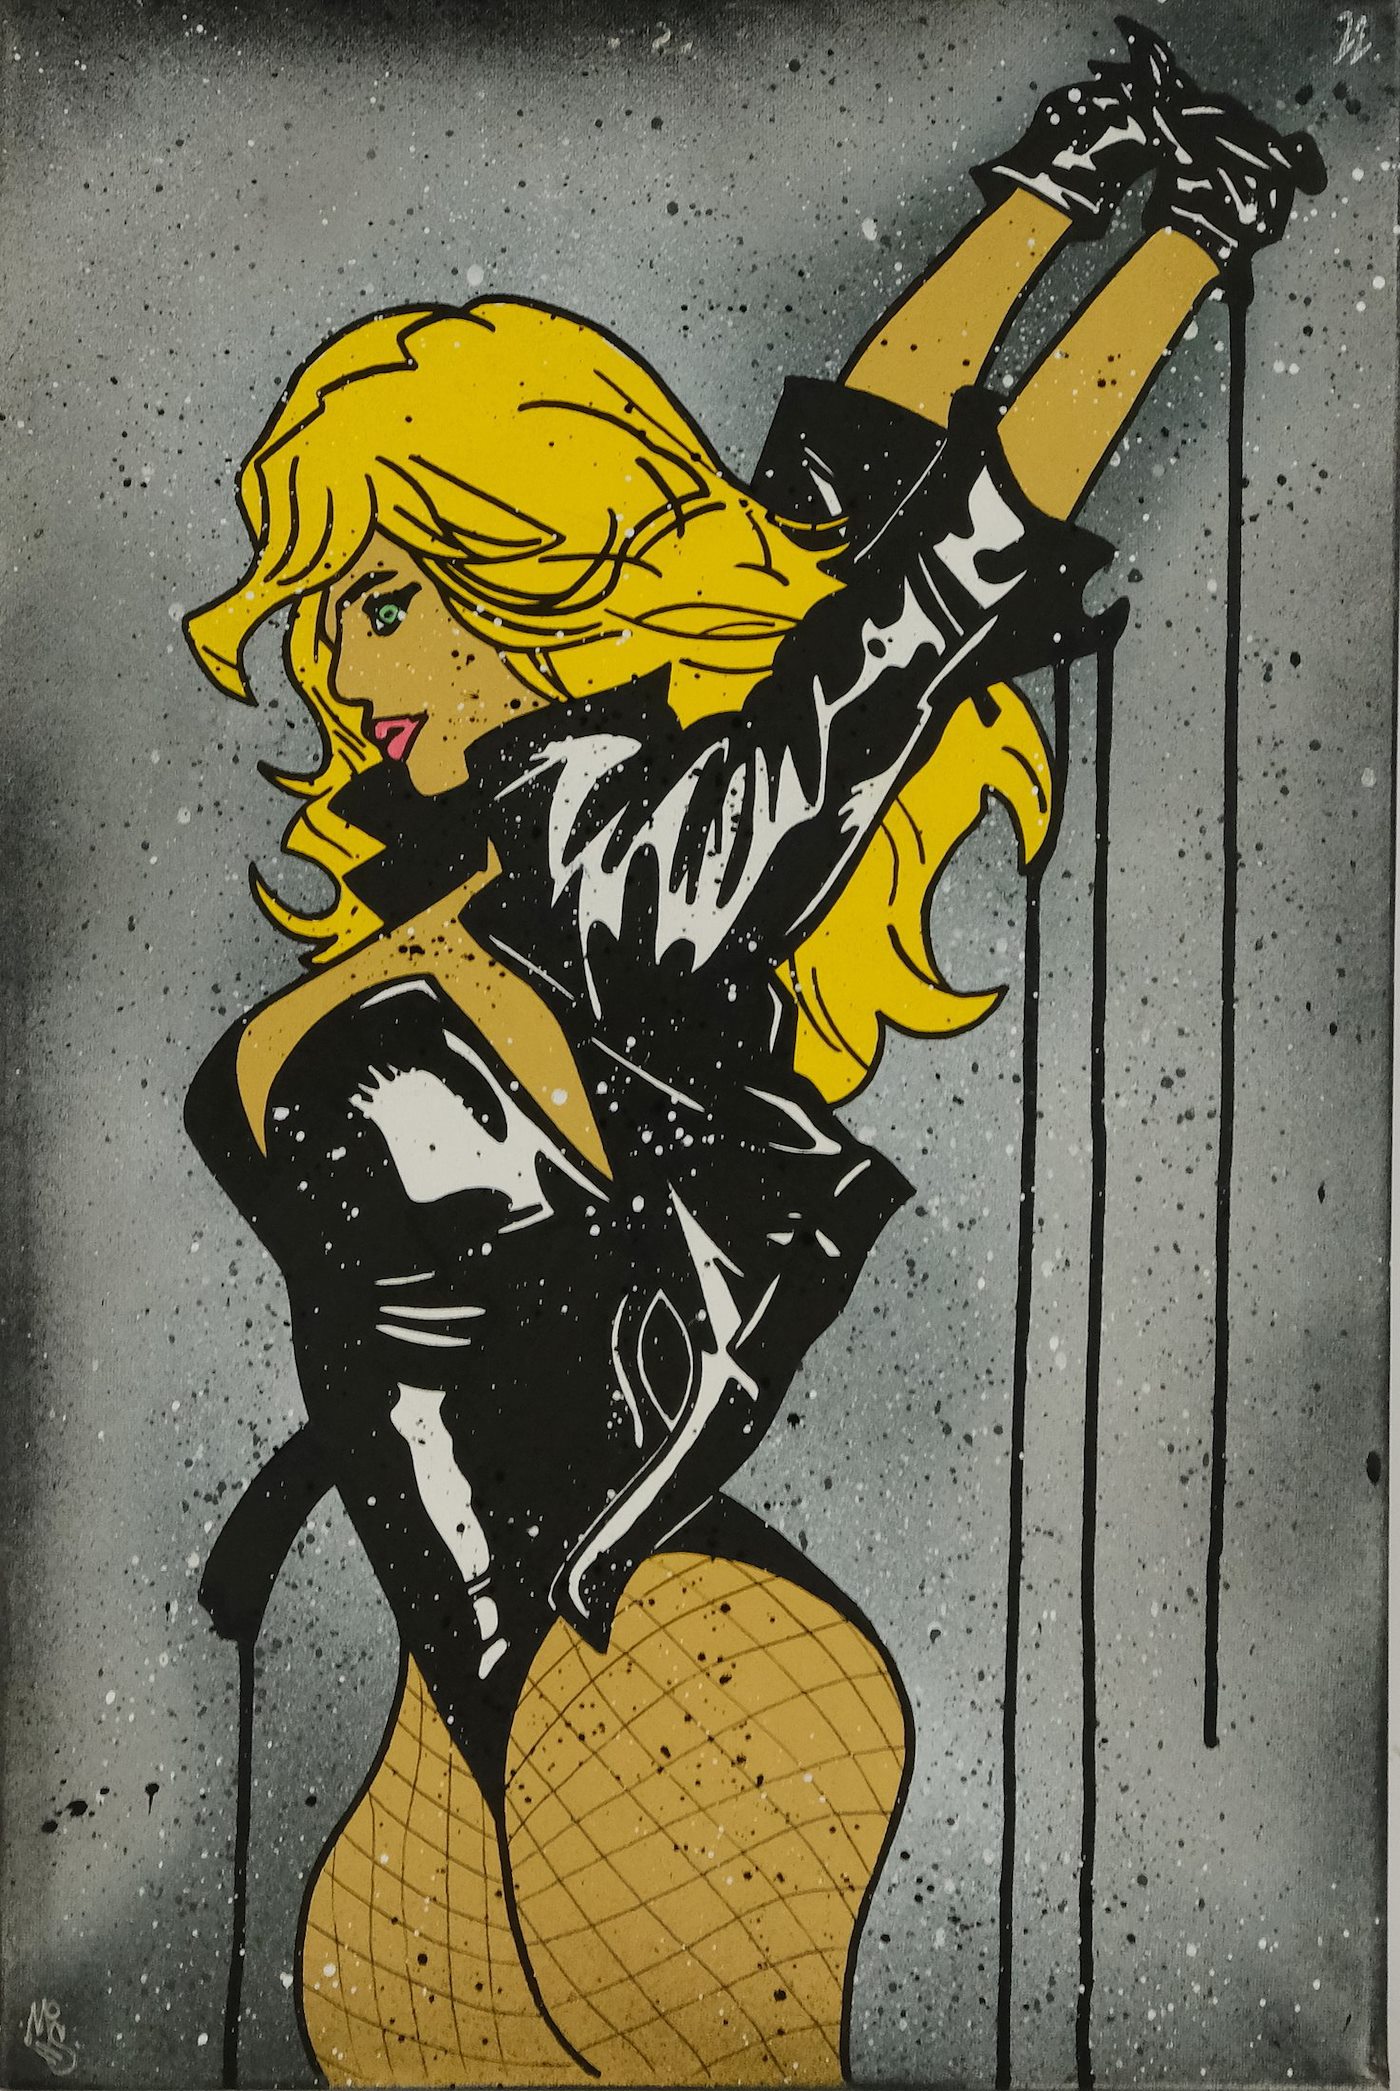 Meon Smells - Black Canary